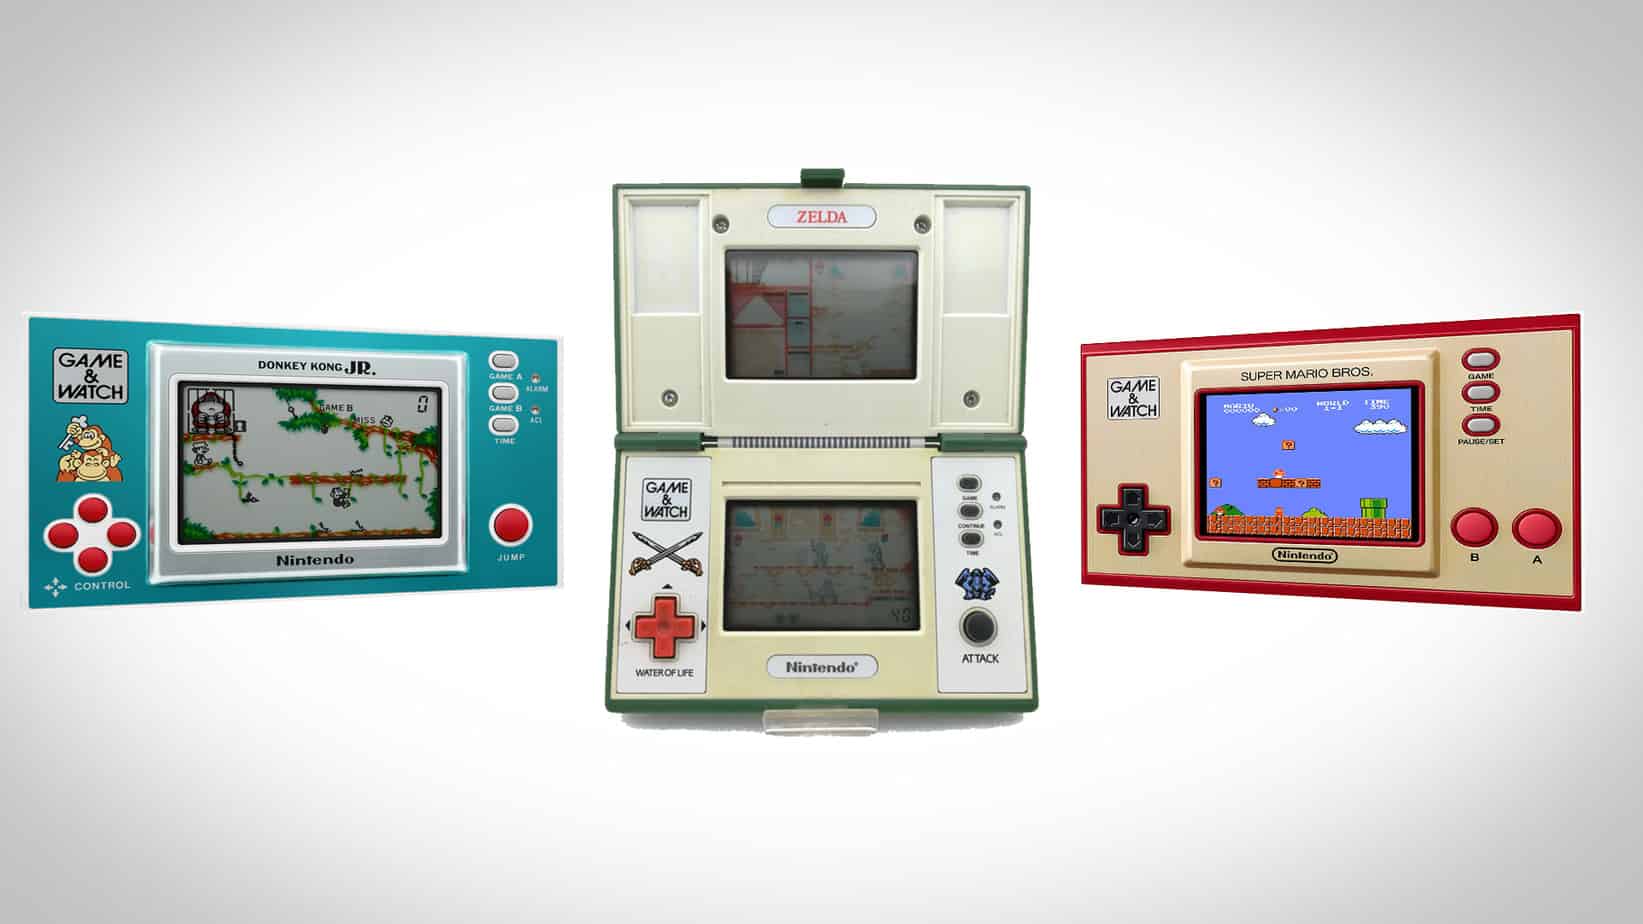 scramble høste tælle 10 Best Game & Watch Games To Relive The Golden Age Of Gaming